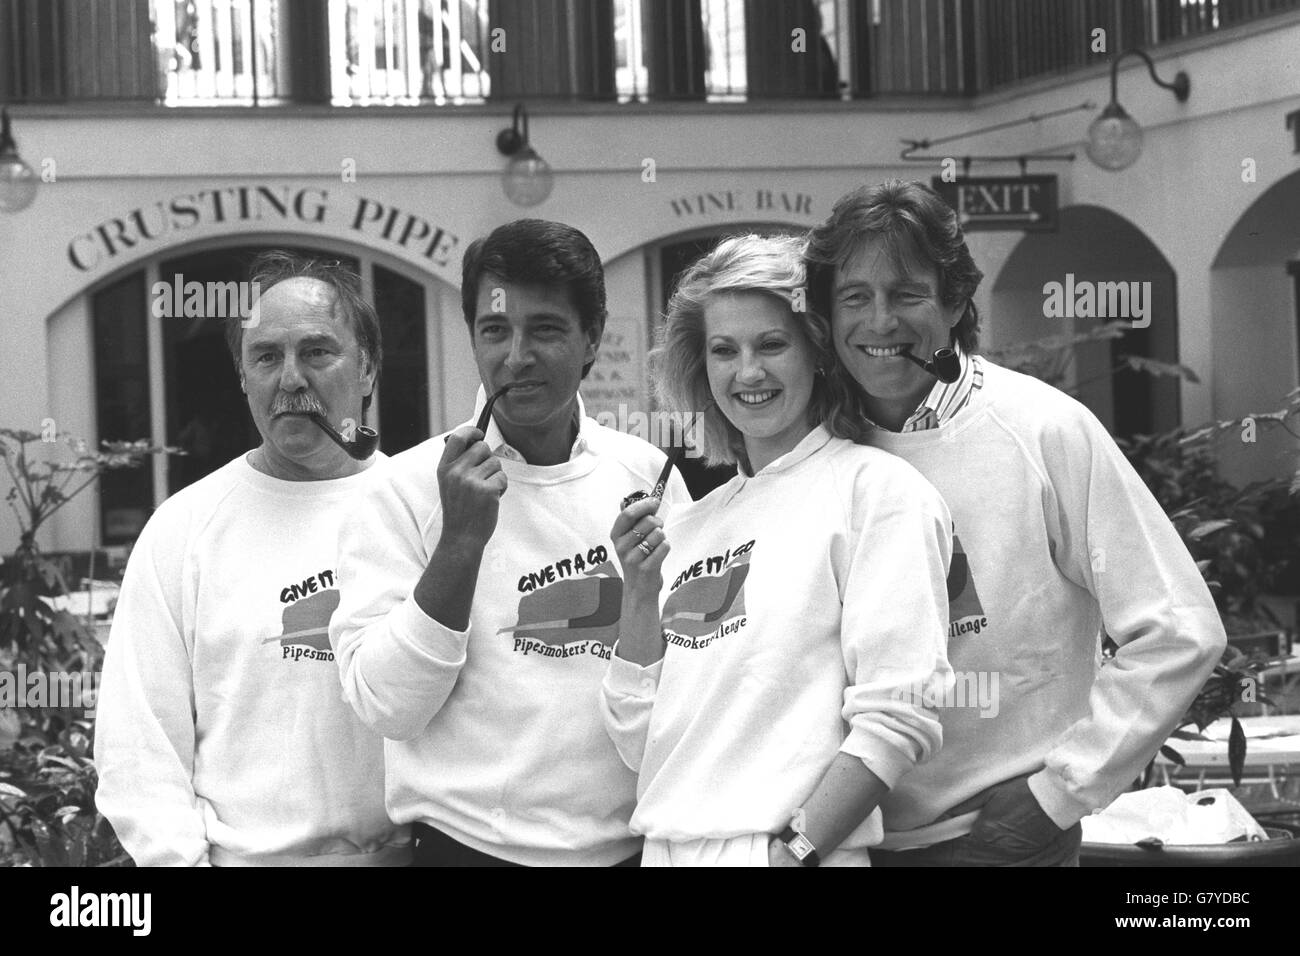 Pipe-smoking actress Tracey Childs joins fellow pipe fans (l-r) TV sports presenter Jimmy Greaves, actor Tony Anholt and property entrepreneur 'Bungalow' Bill Wiggins in London's Covent Gardens. They are launching The Pipesmokers' Council's 'Give It A Go' challenge for 1988. Along with Pipesmoker of the Year Ian Botham, the team will aim to dispel the old armchair and slippers image of pipe smoking by participating in unusual events such as sheep shearing, winch grinding and scurry driving. Stock Photo